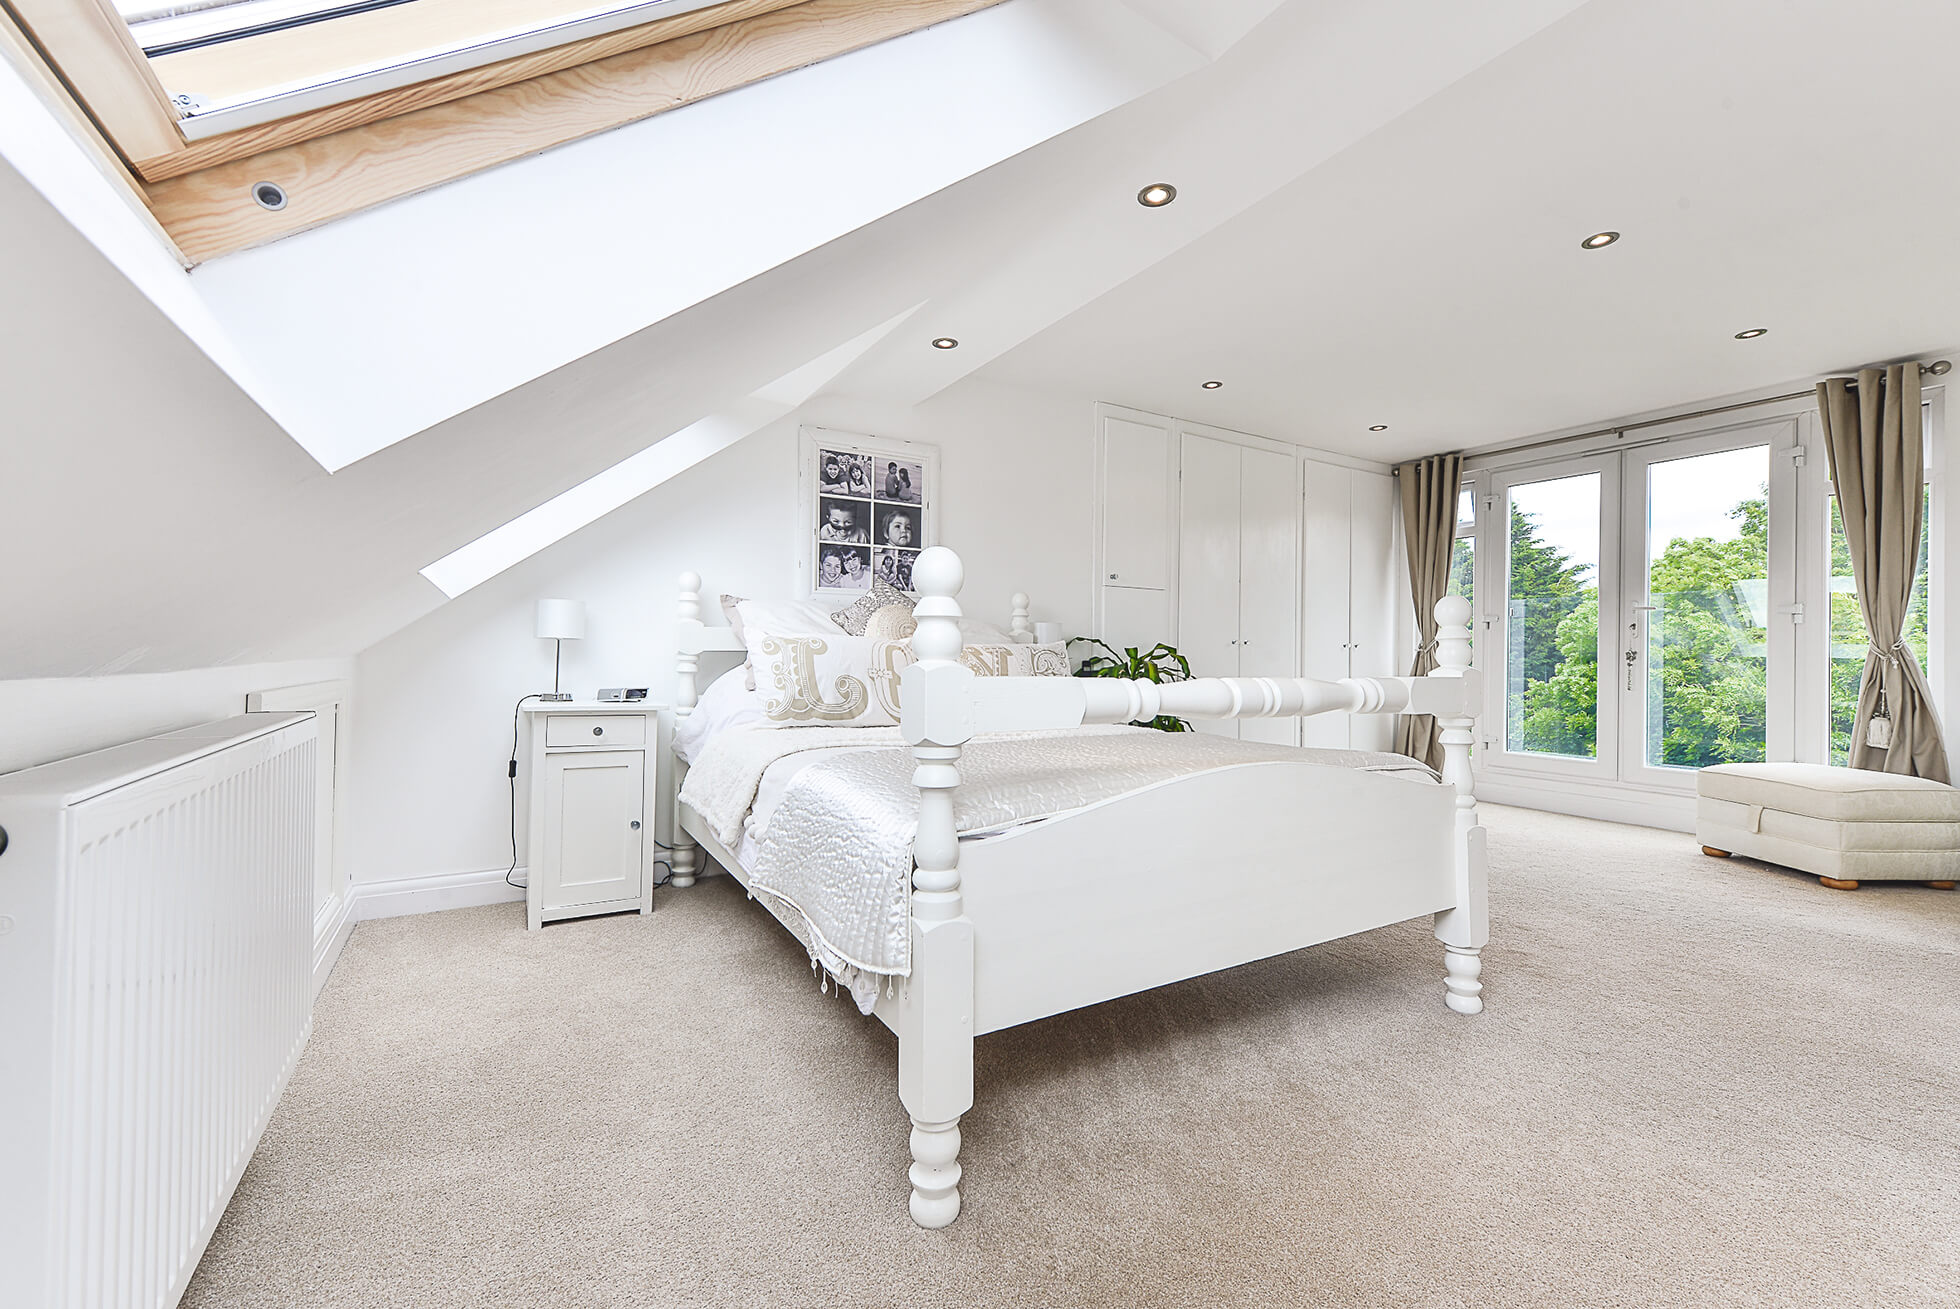 Do you have a question about converting your Loft in Adeyfield? Here are the most popular questions asked by our clients.